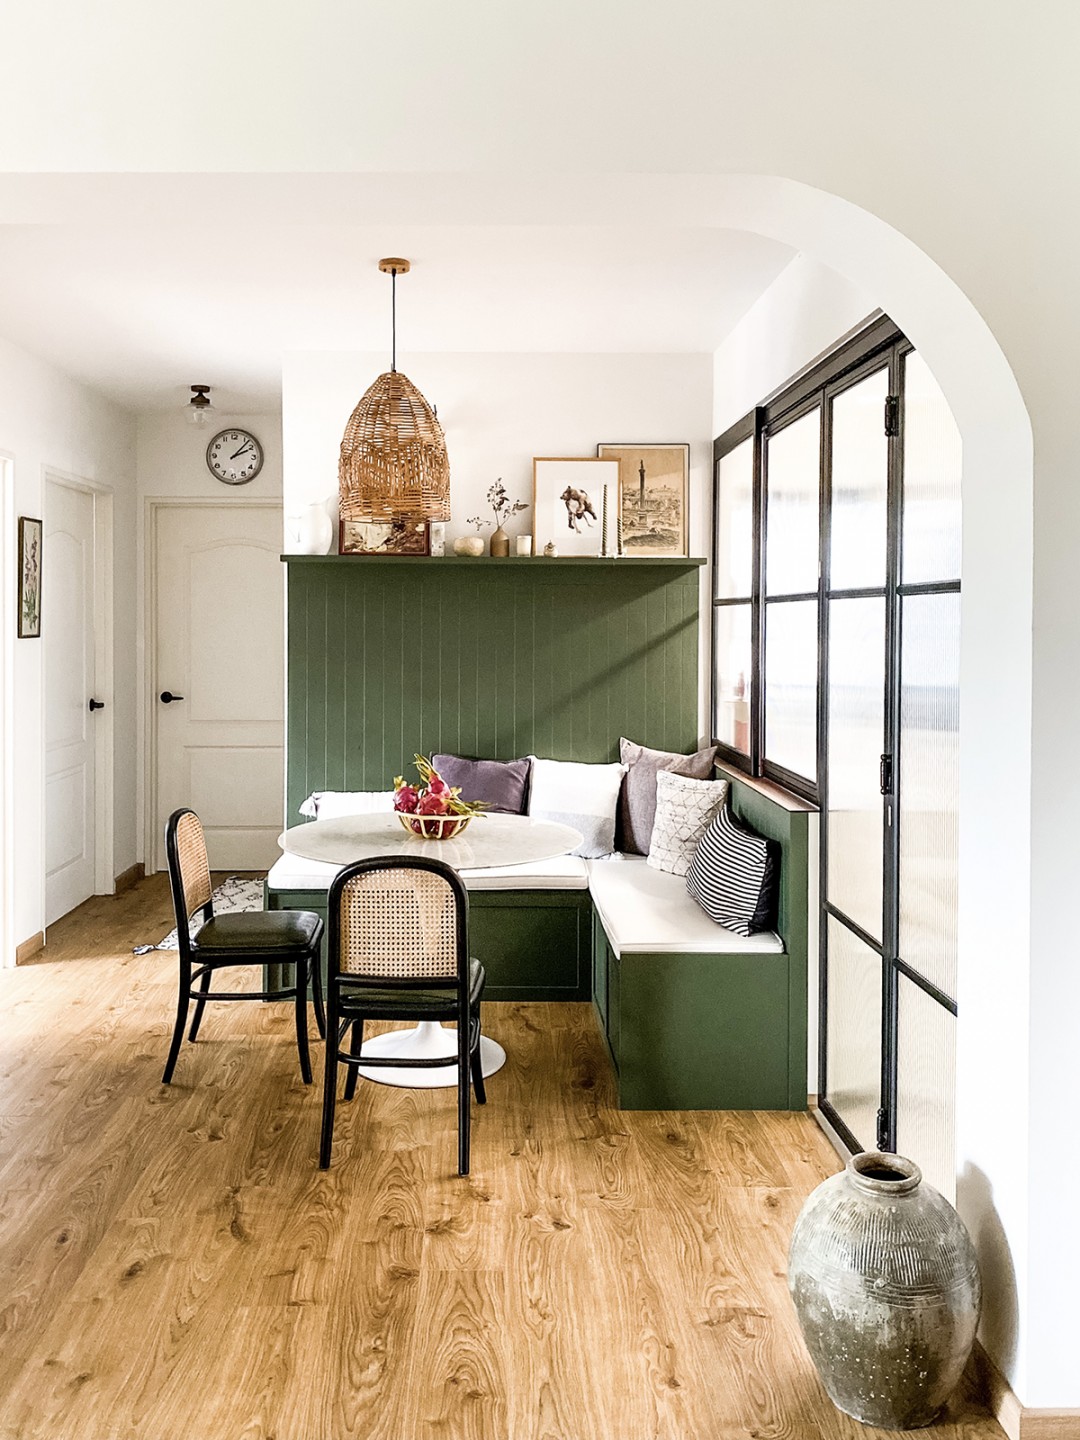 squarerooms cnbrr home fazlie corinne instagram bto flat account hdb homeowners interview singapore canberra mediterranean inspired design apartment style kitchen rustic traditional old retro charm green dinette benches glass door